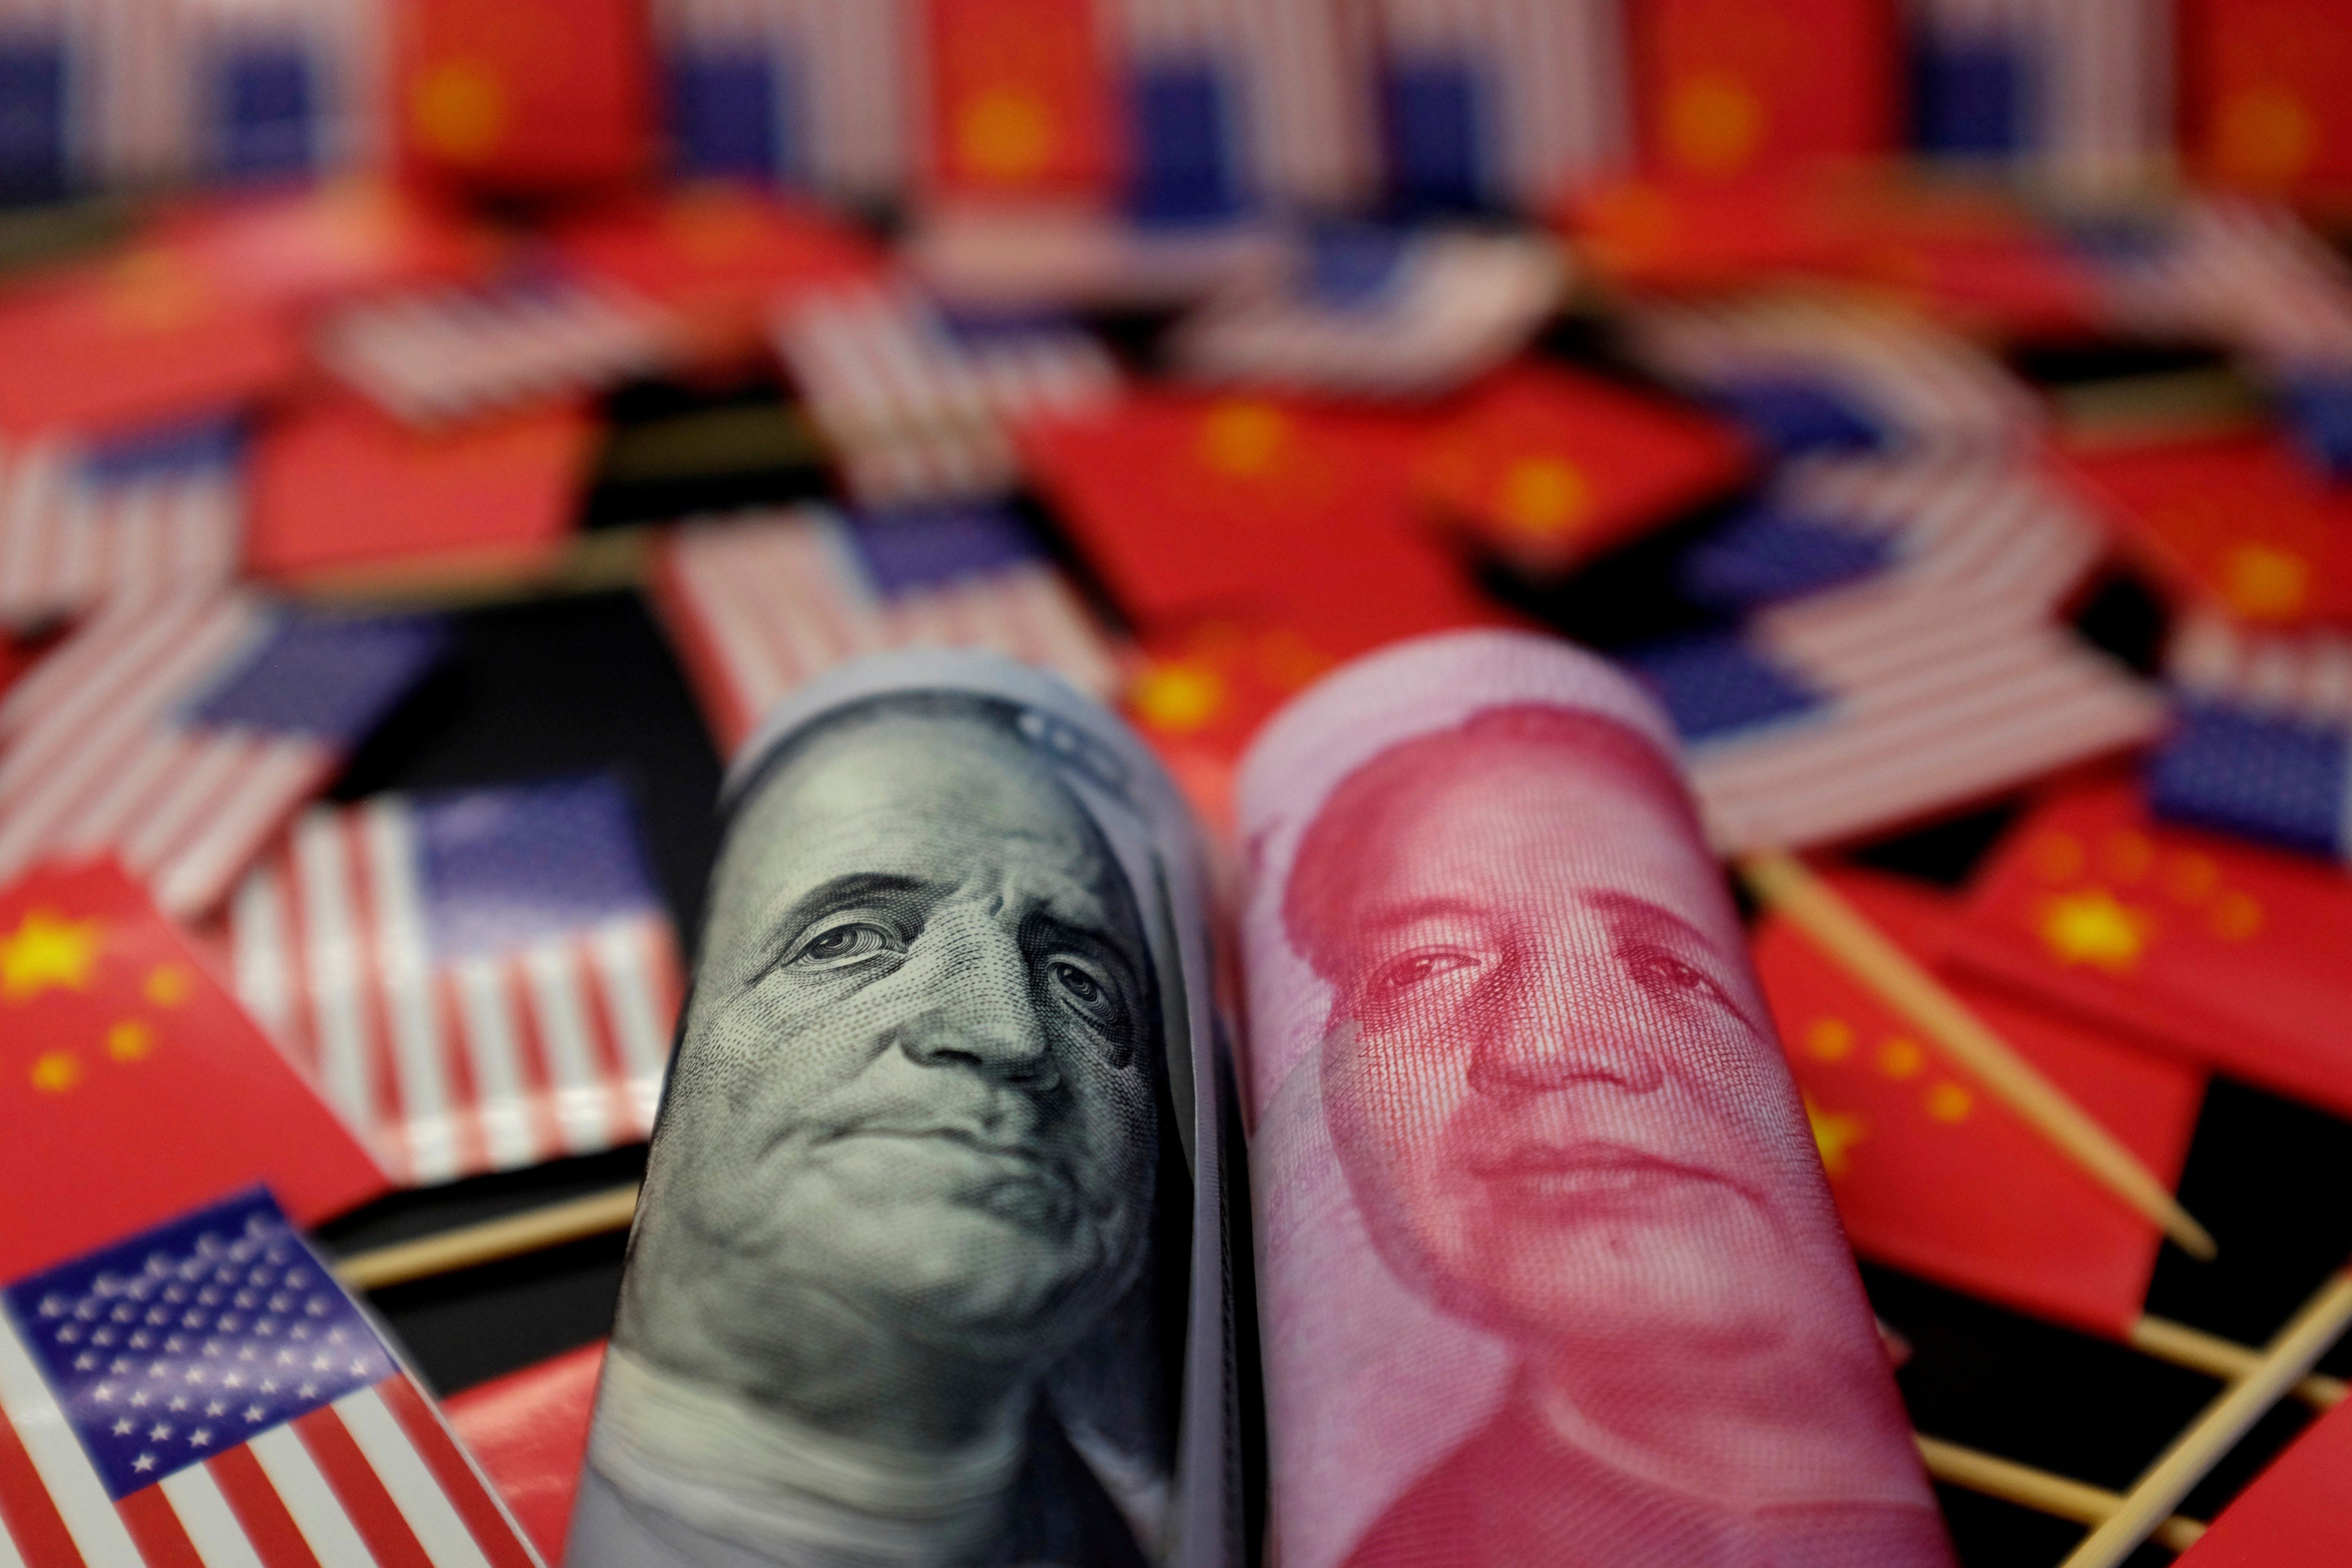 The decoupling of the world’s two largest economies would fuel the emergence of a bipolar world order led by rival hegemons, fragmenting the trade and financial system that has underpinned the global economy for decades. Photo: Reuters